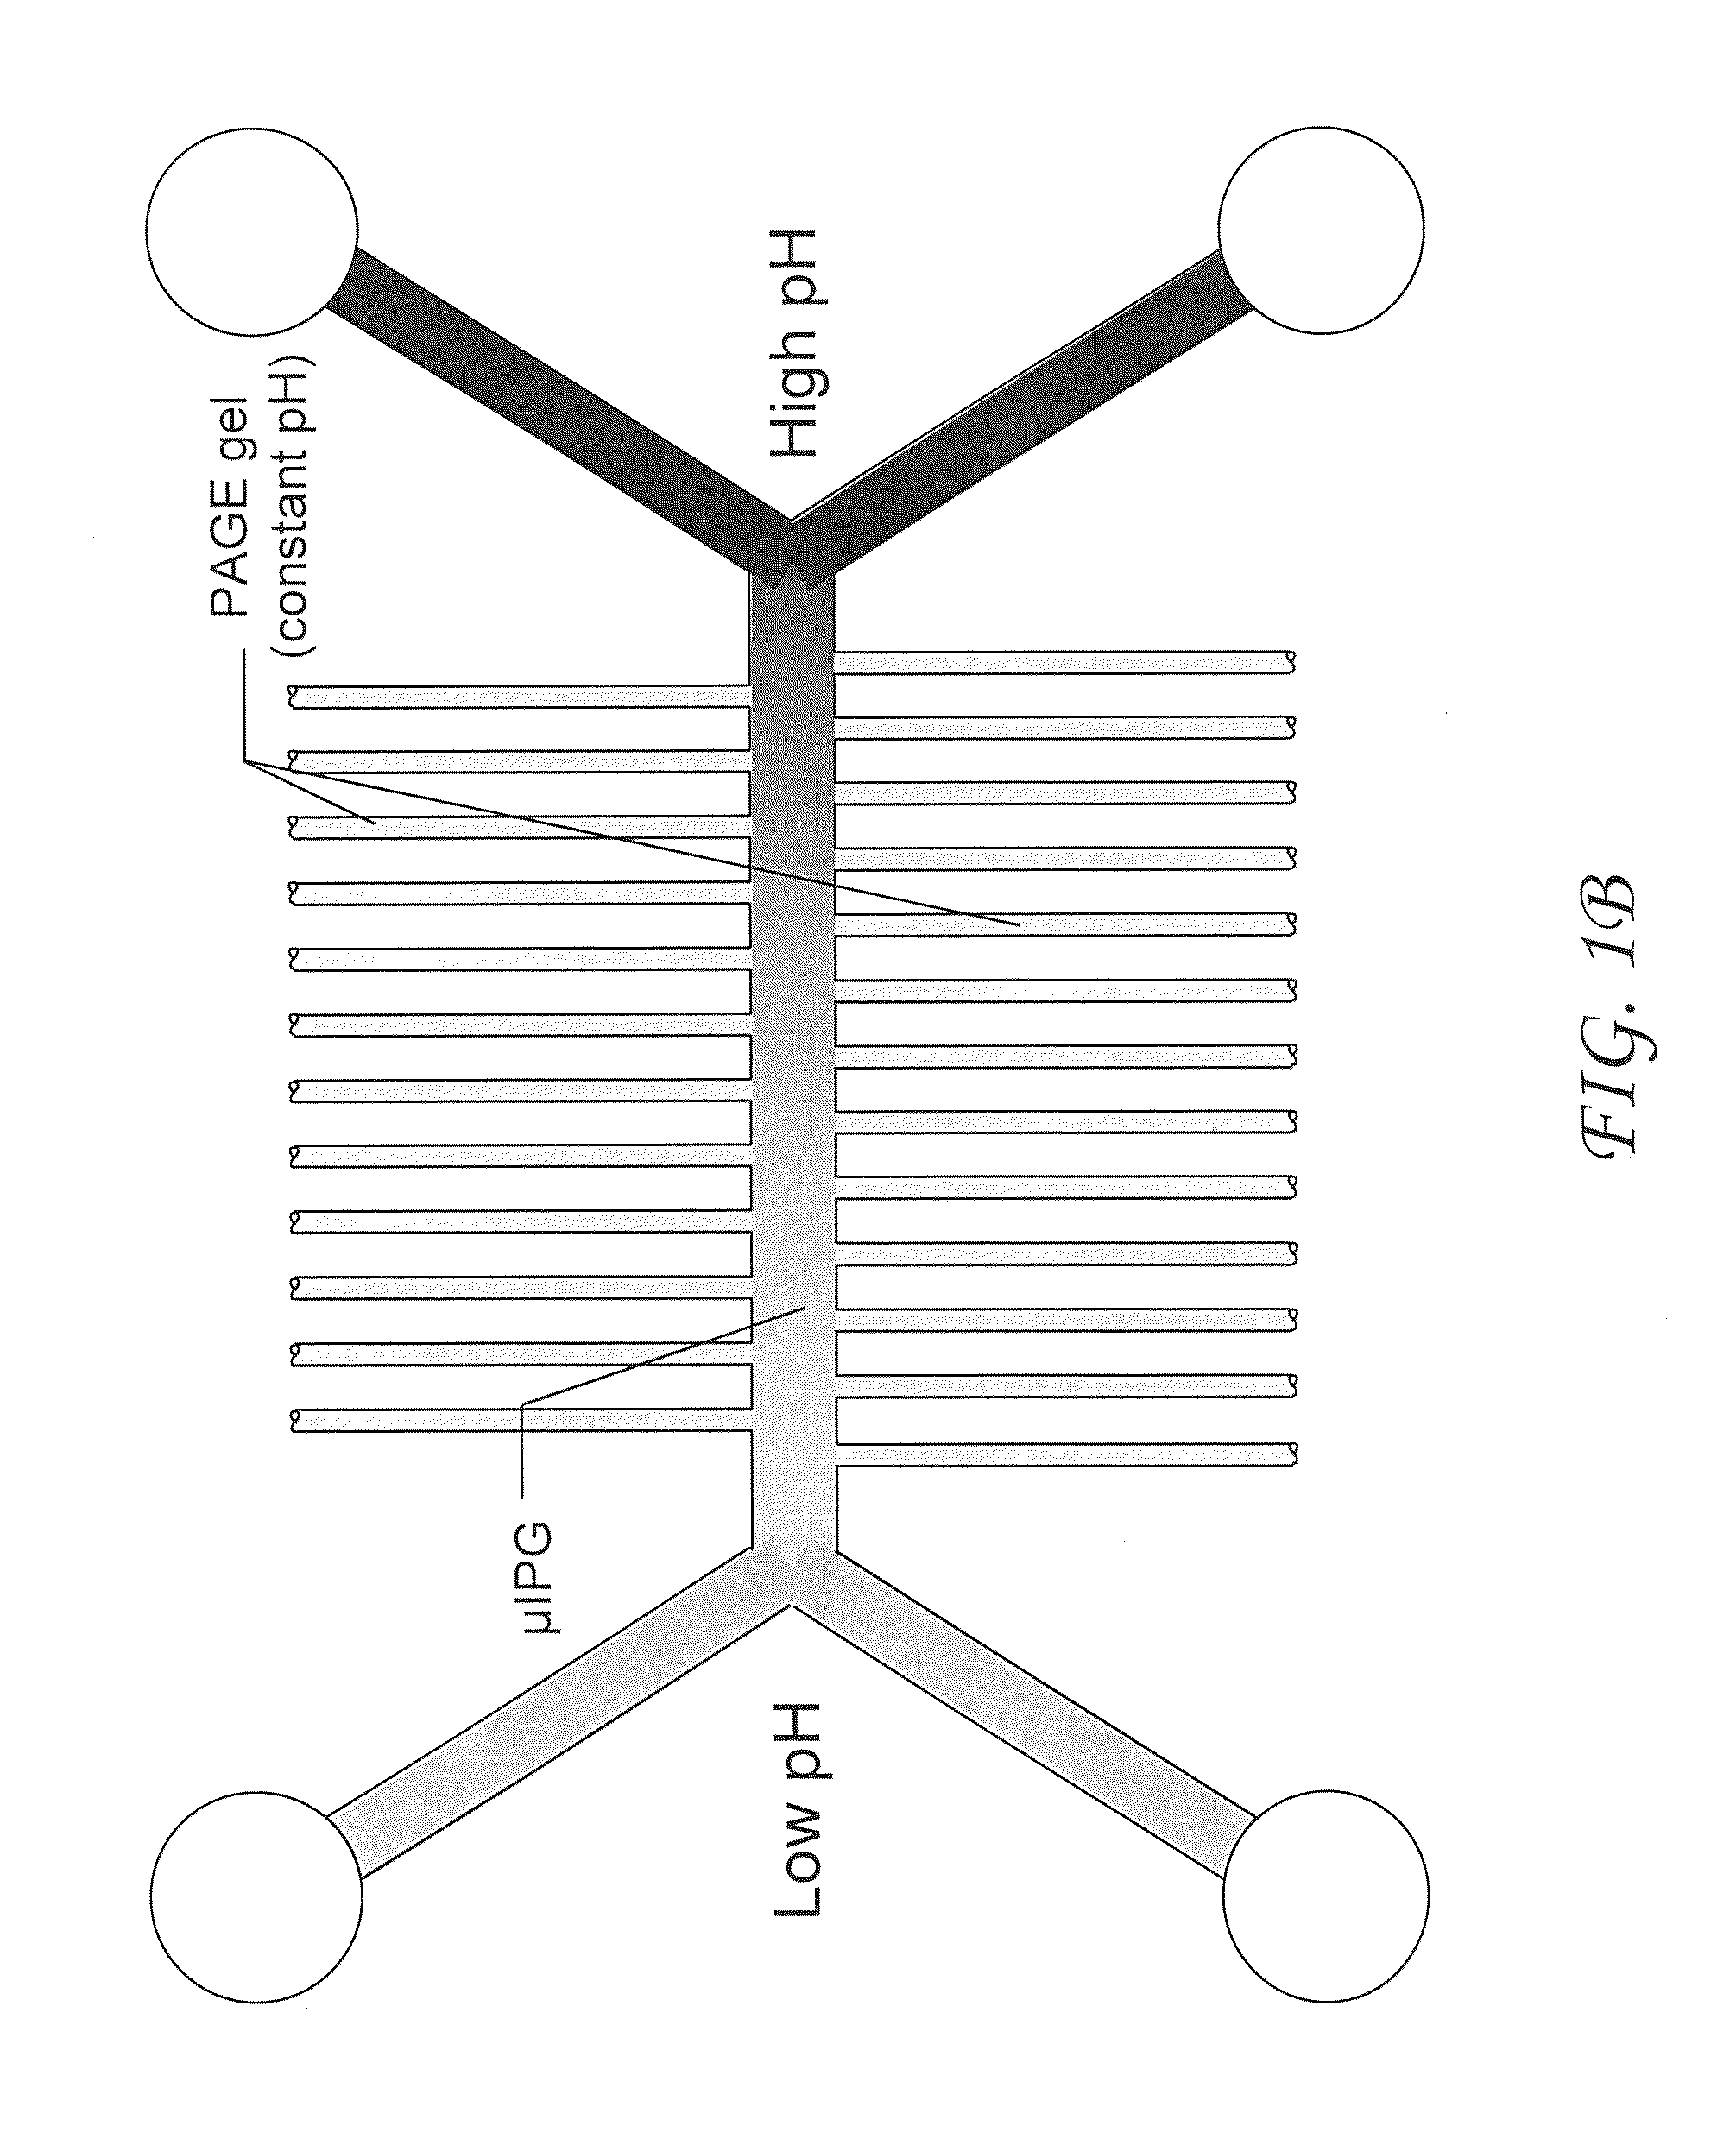 Microfluidic device having an immobilized pH gradient and page gels for protein separation and analysis